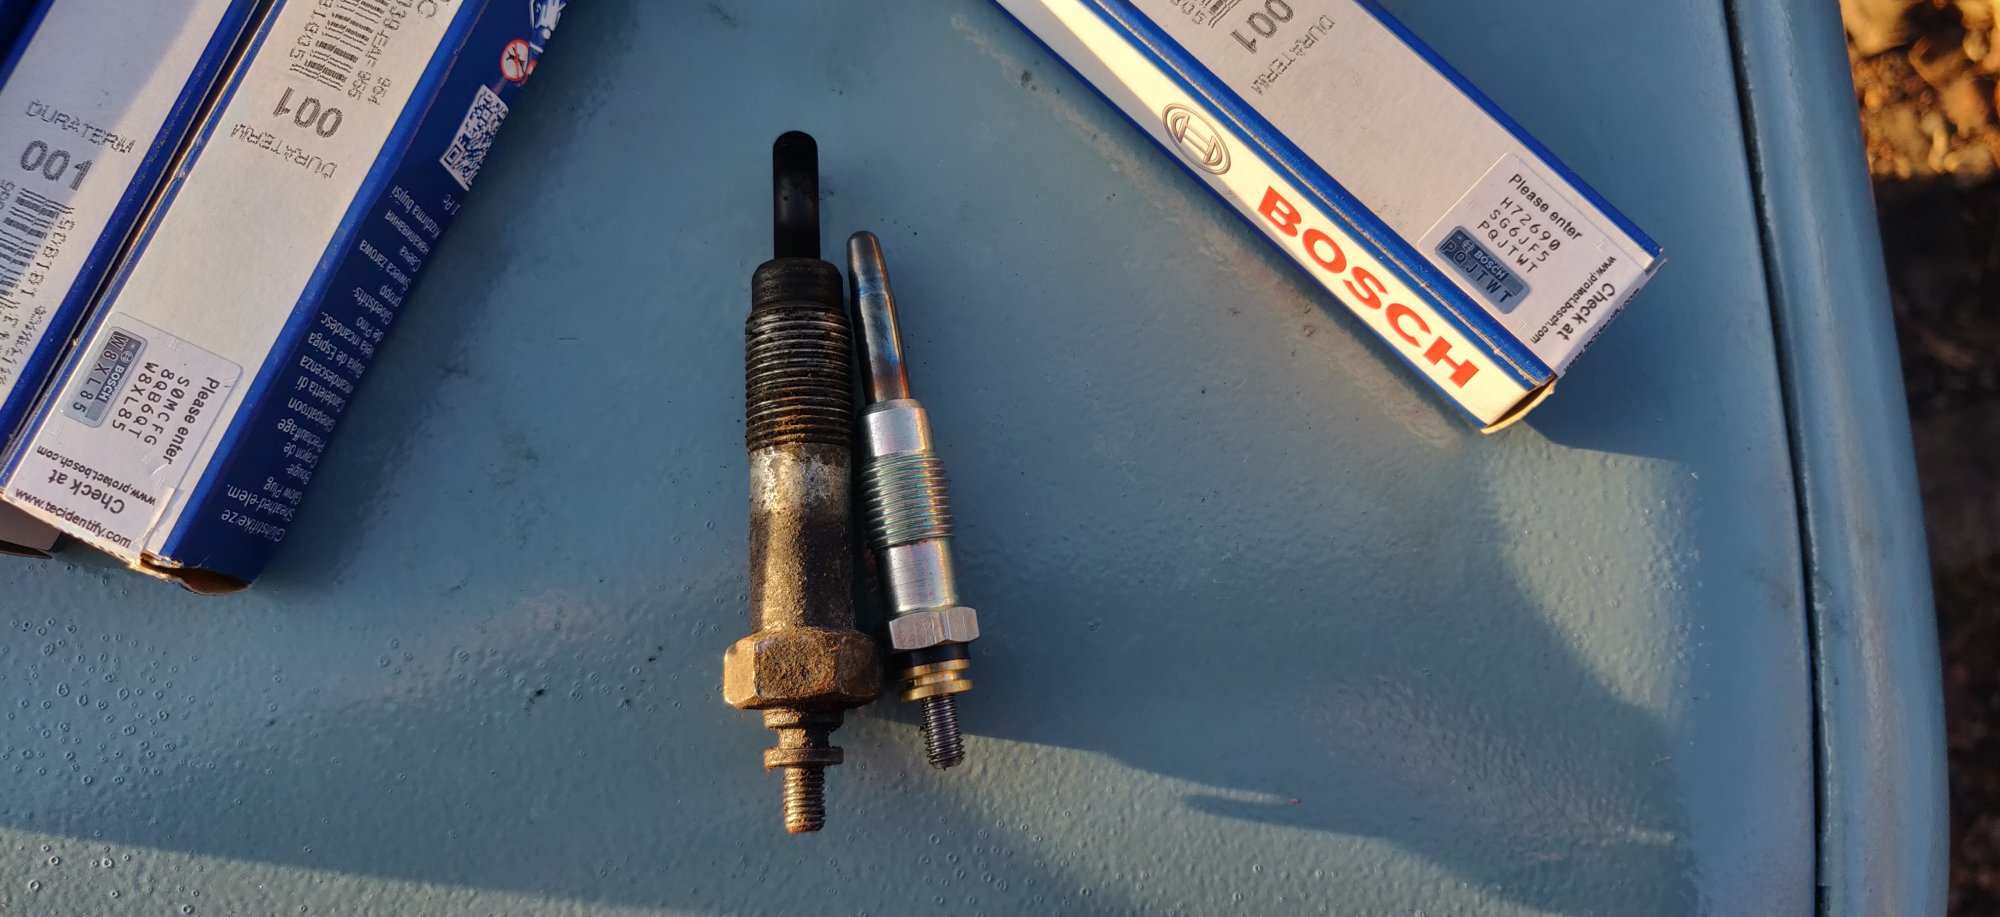 Glow plugs swap - engine hot or cold? | Land Rover UK Forums 6.2 Diesel Glow Plugs Not Working